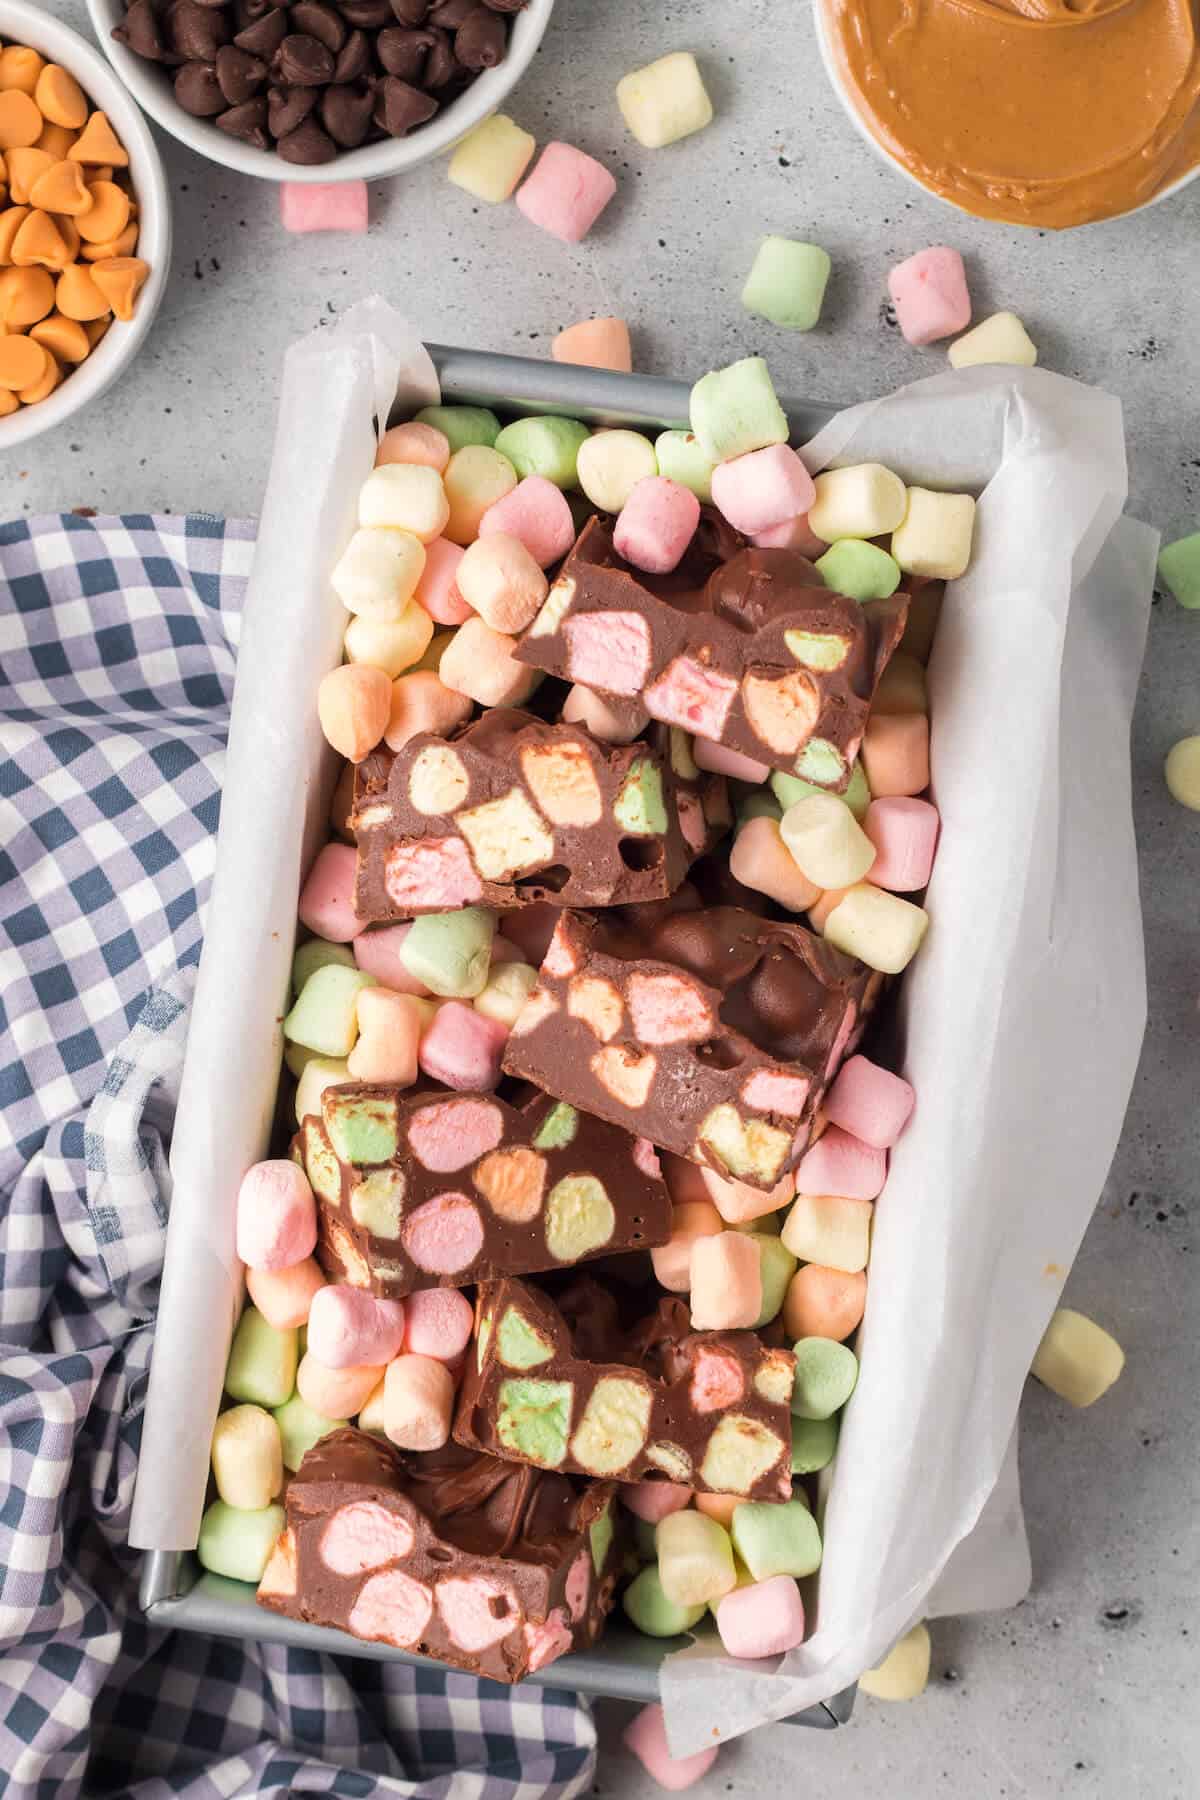 Chocolate confetti bars cut up in a loaf pan.